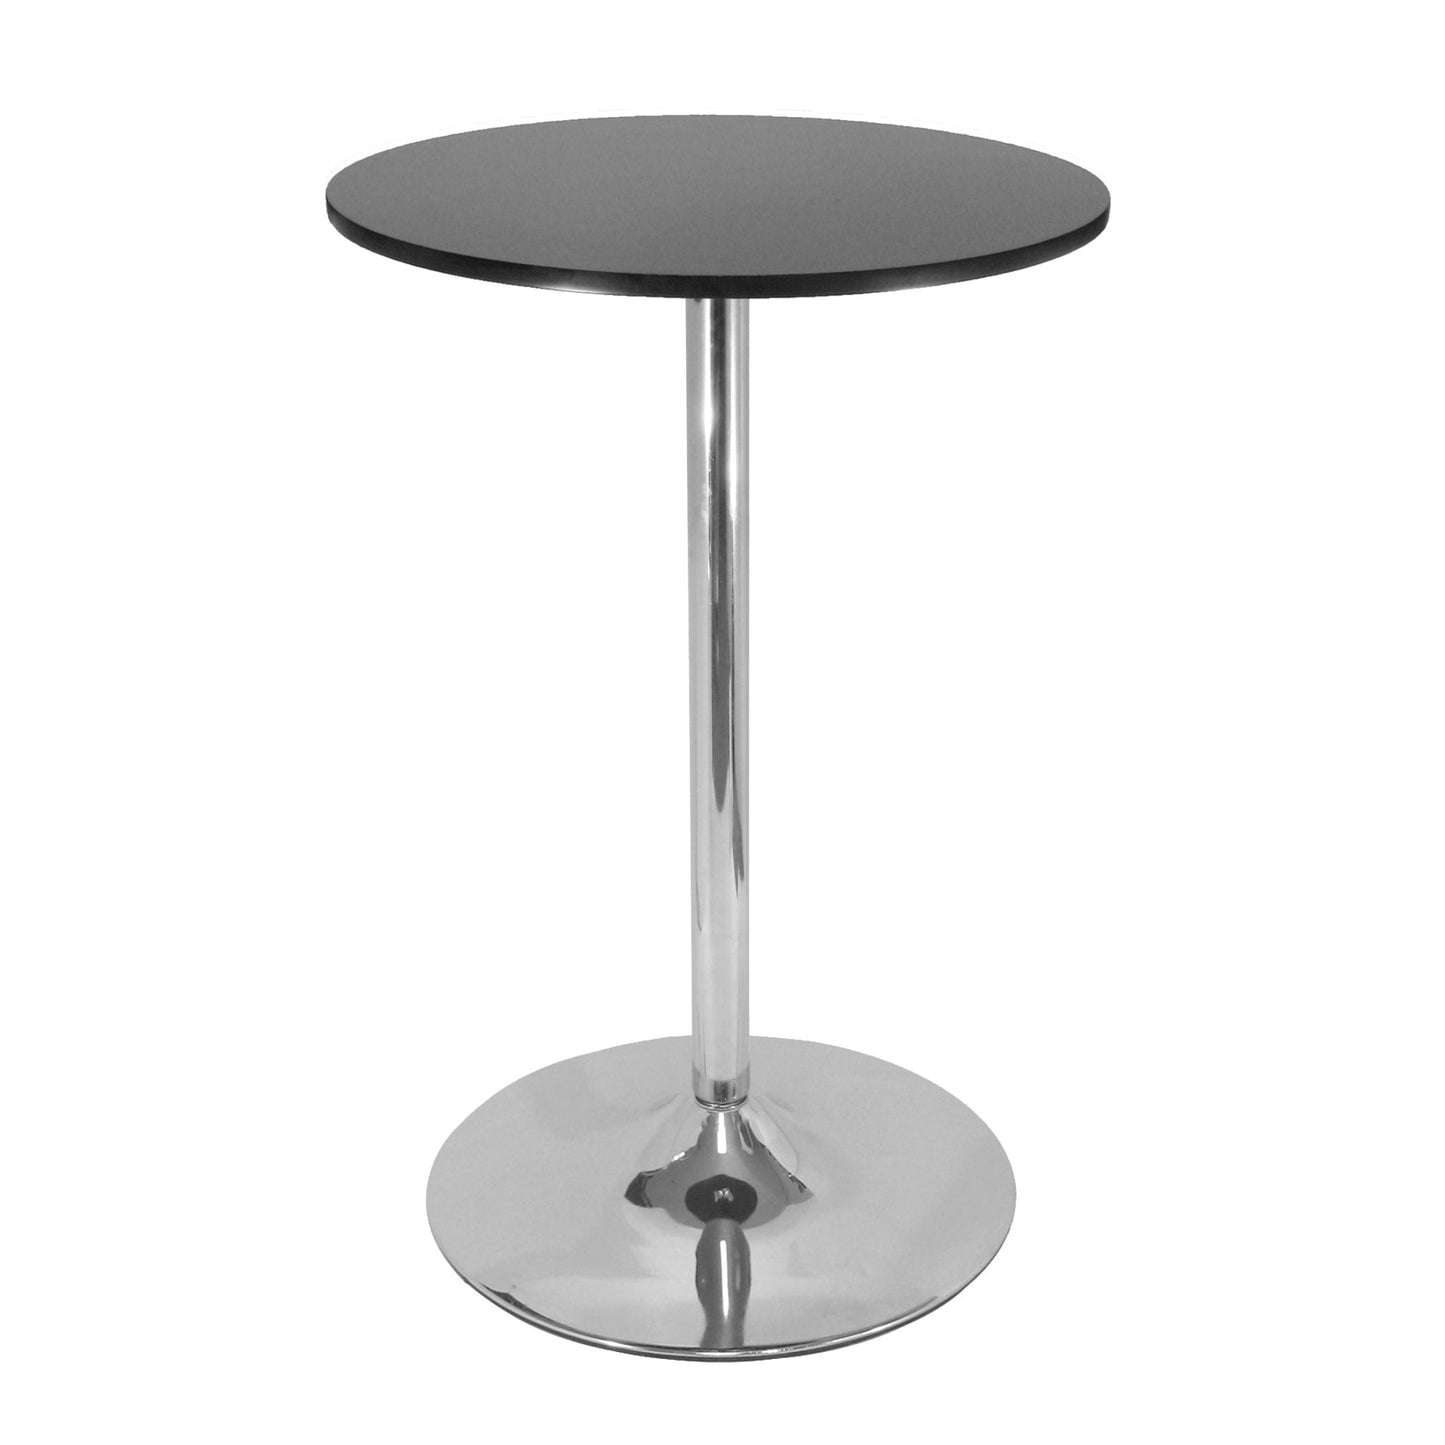 Winesome Wood Spectrum 28" Bar Height Table, Black and Chrome - The Bar Design